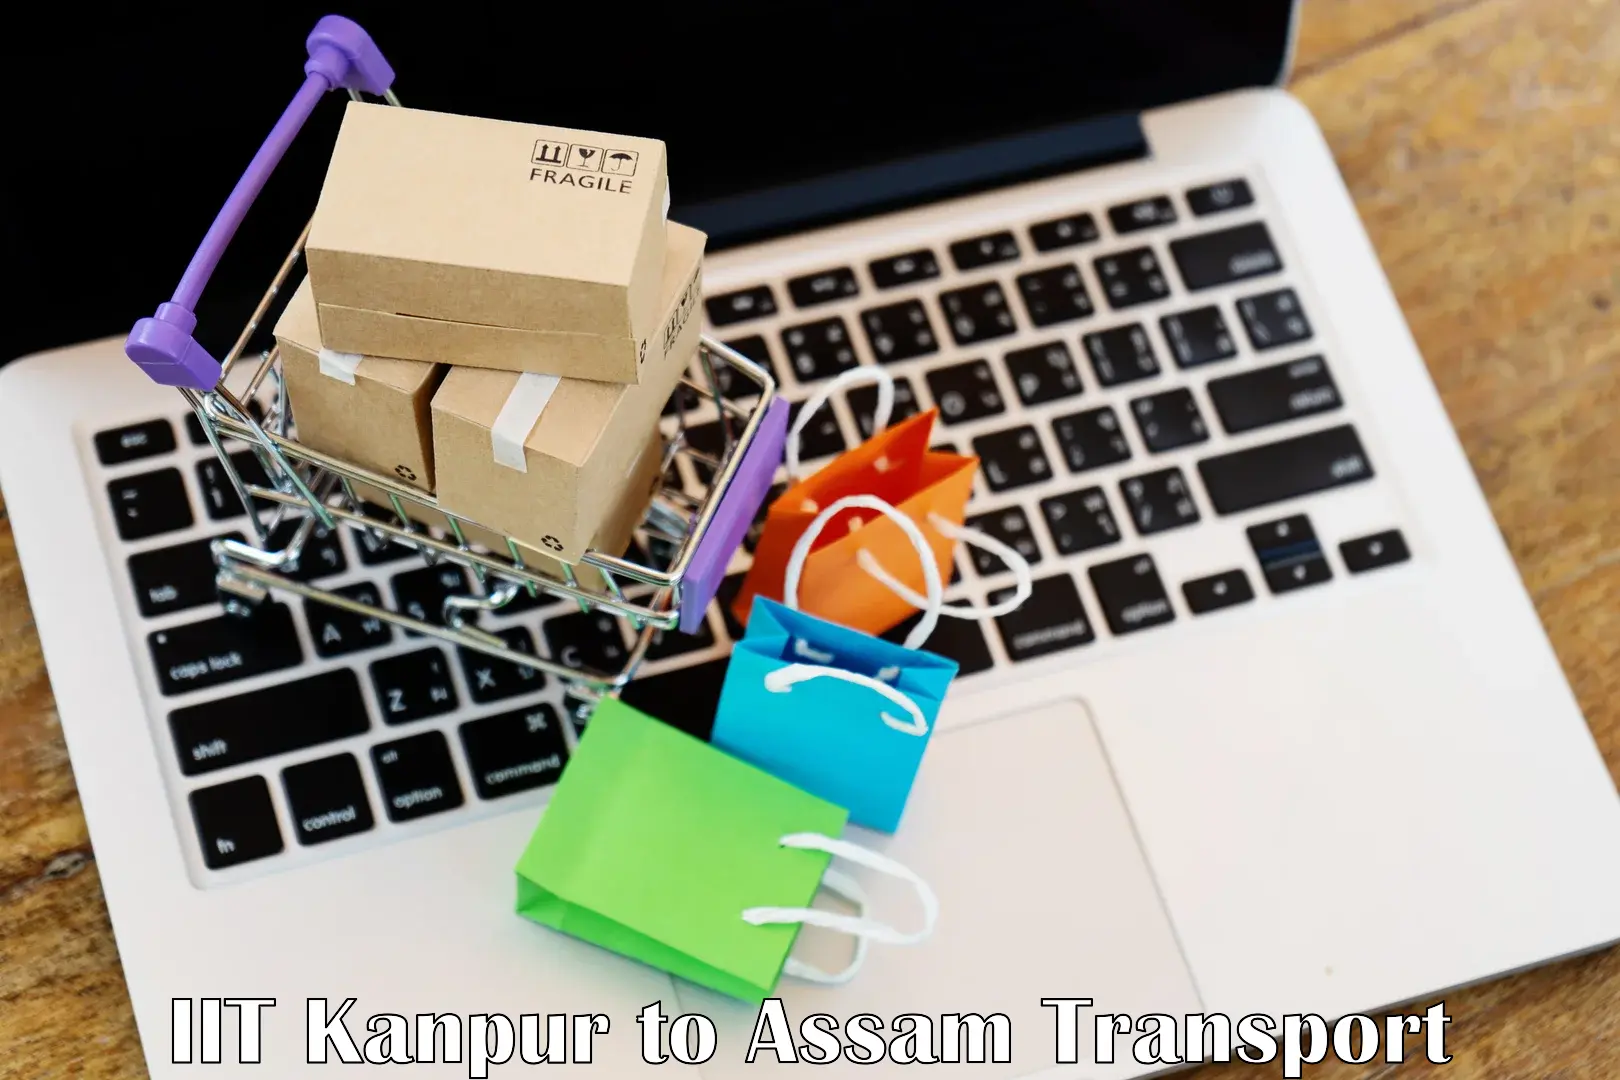 Shipping partner IIT Kanpur to Assam